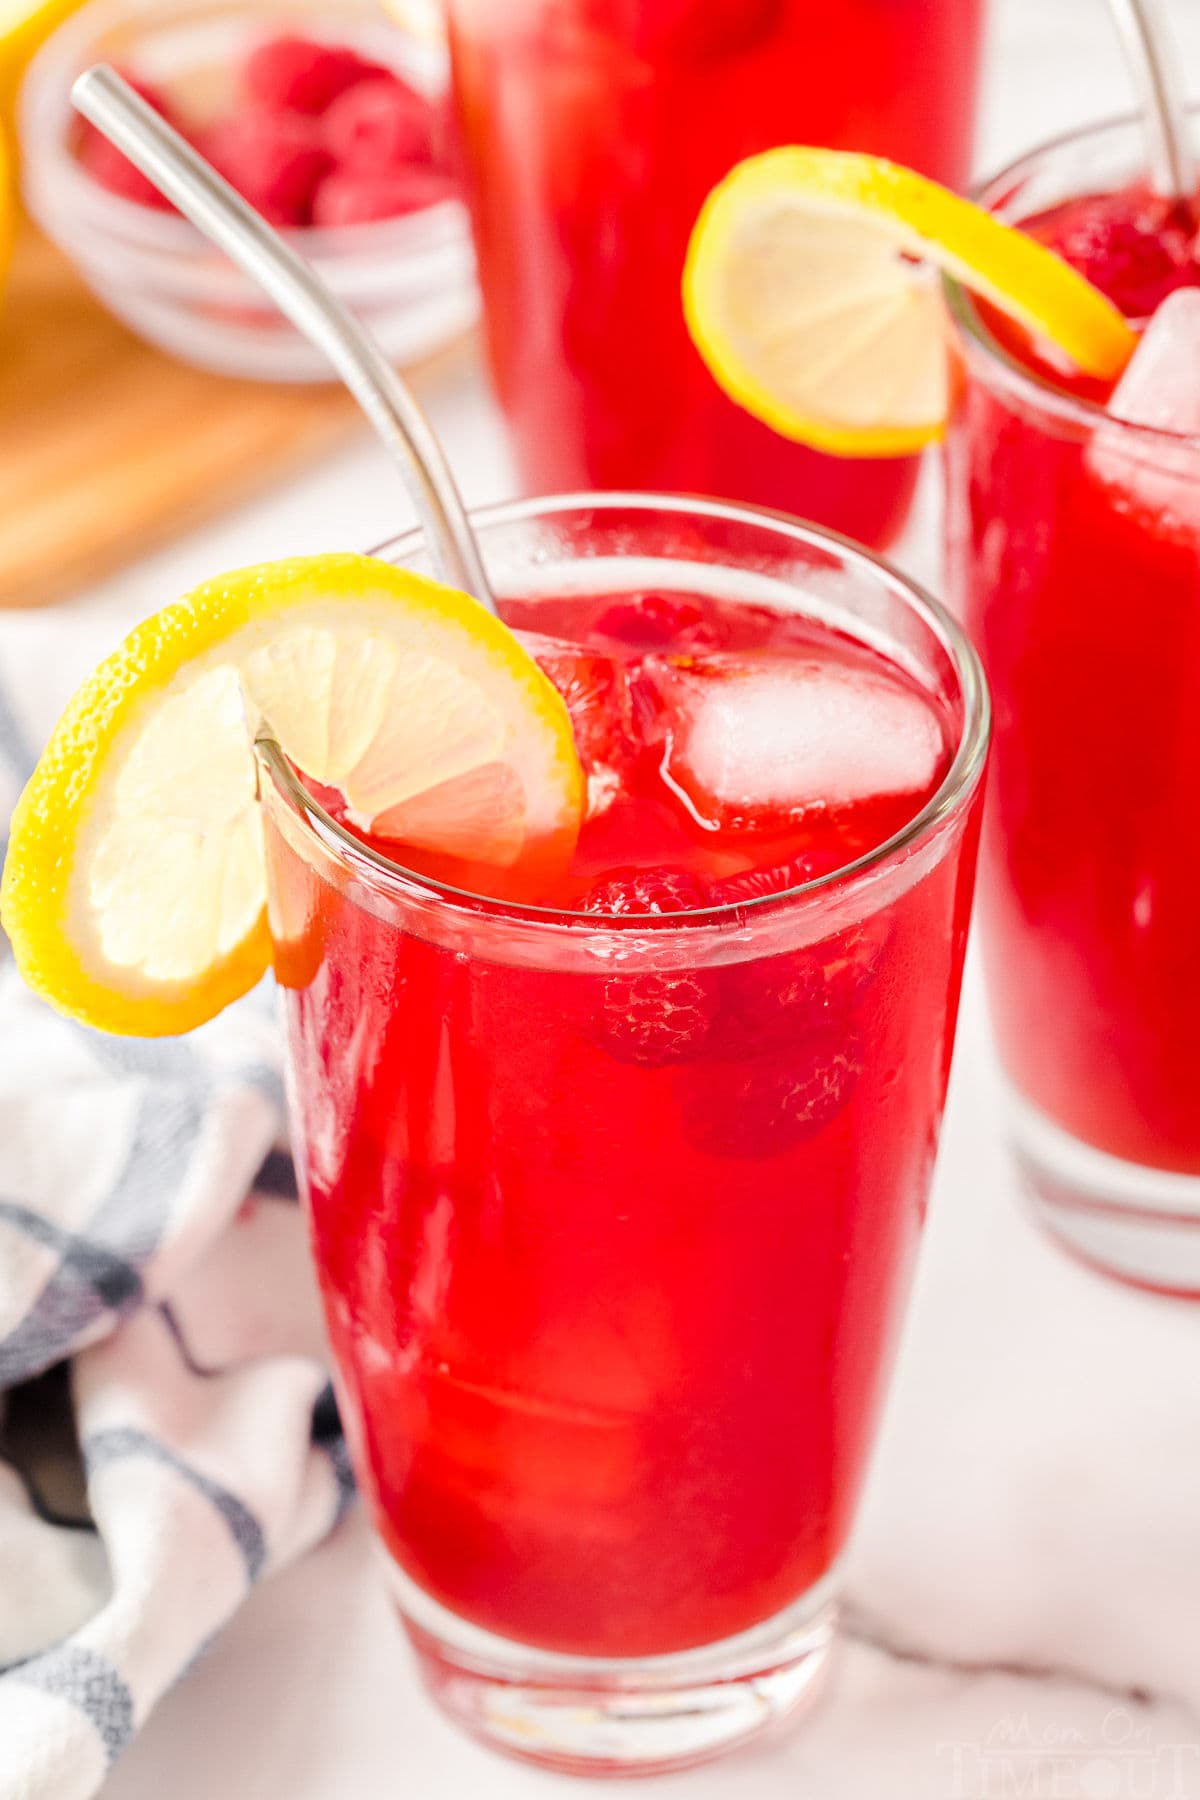 top down angled view of a glass filed with vibrantly colored raspberry iced tea topped with a lemon slice. a stainless steel straw is inserted into the glass and two more filled glasses can be seen in the background.